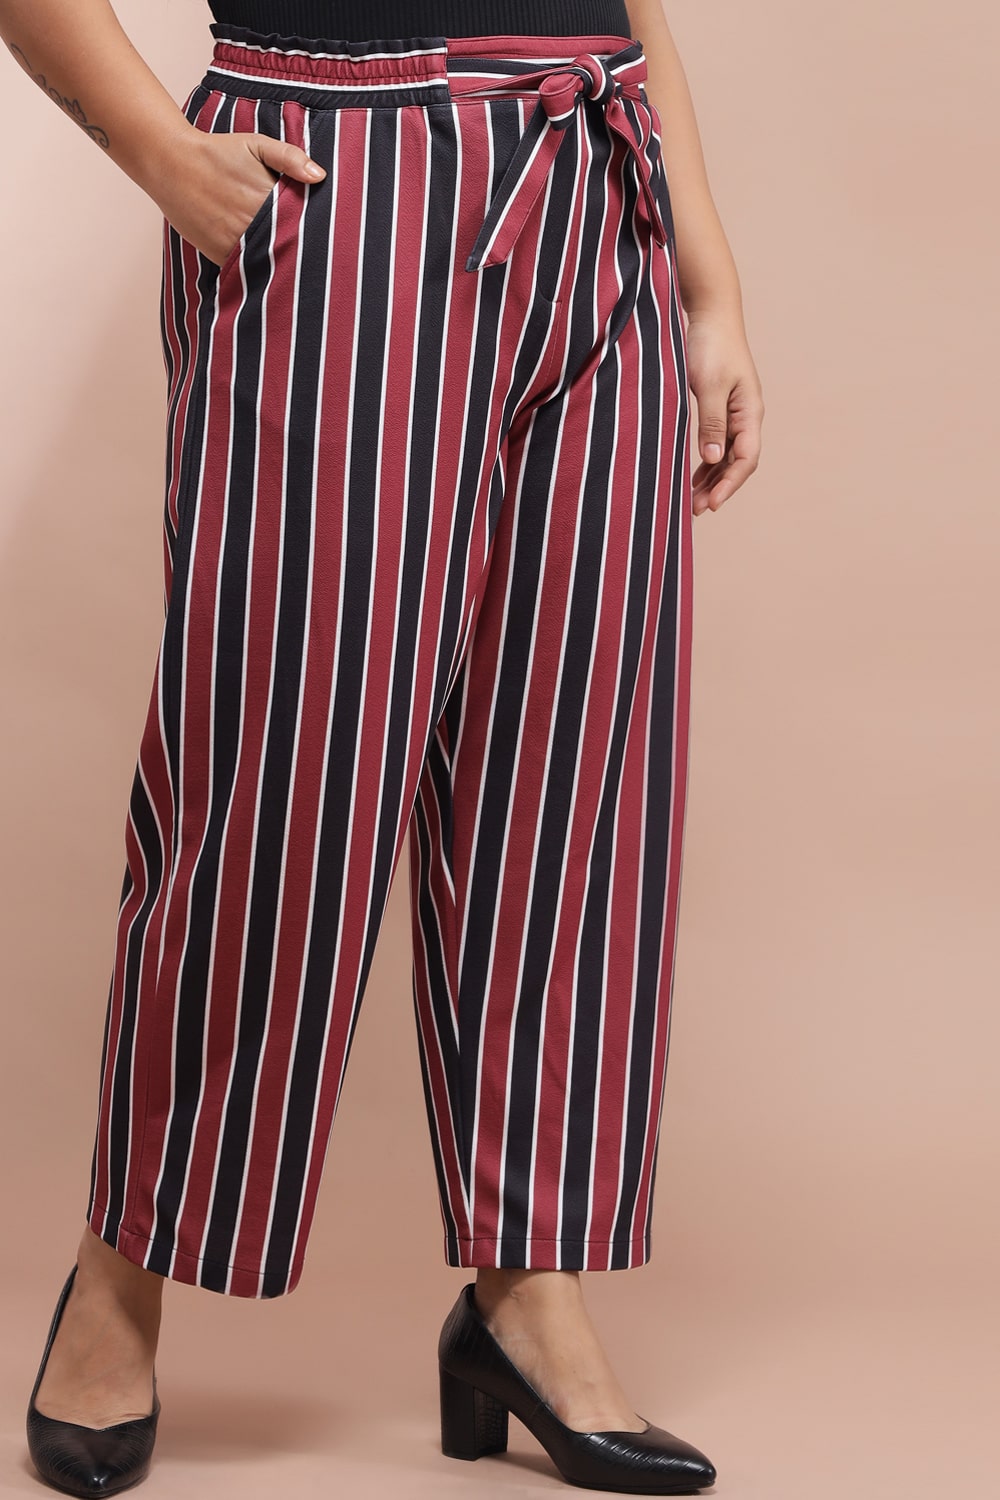 Red Navy Striped Pants for Women